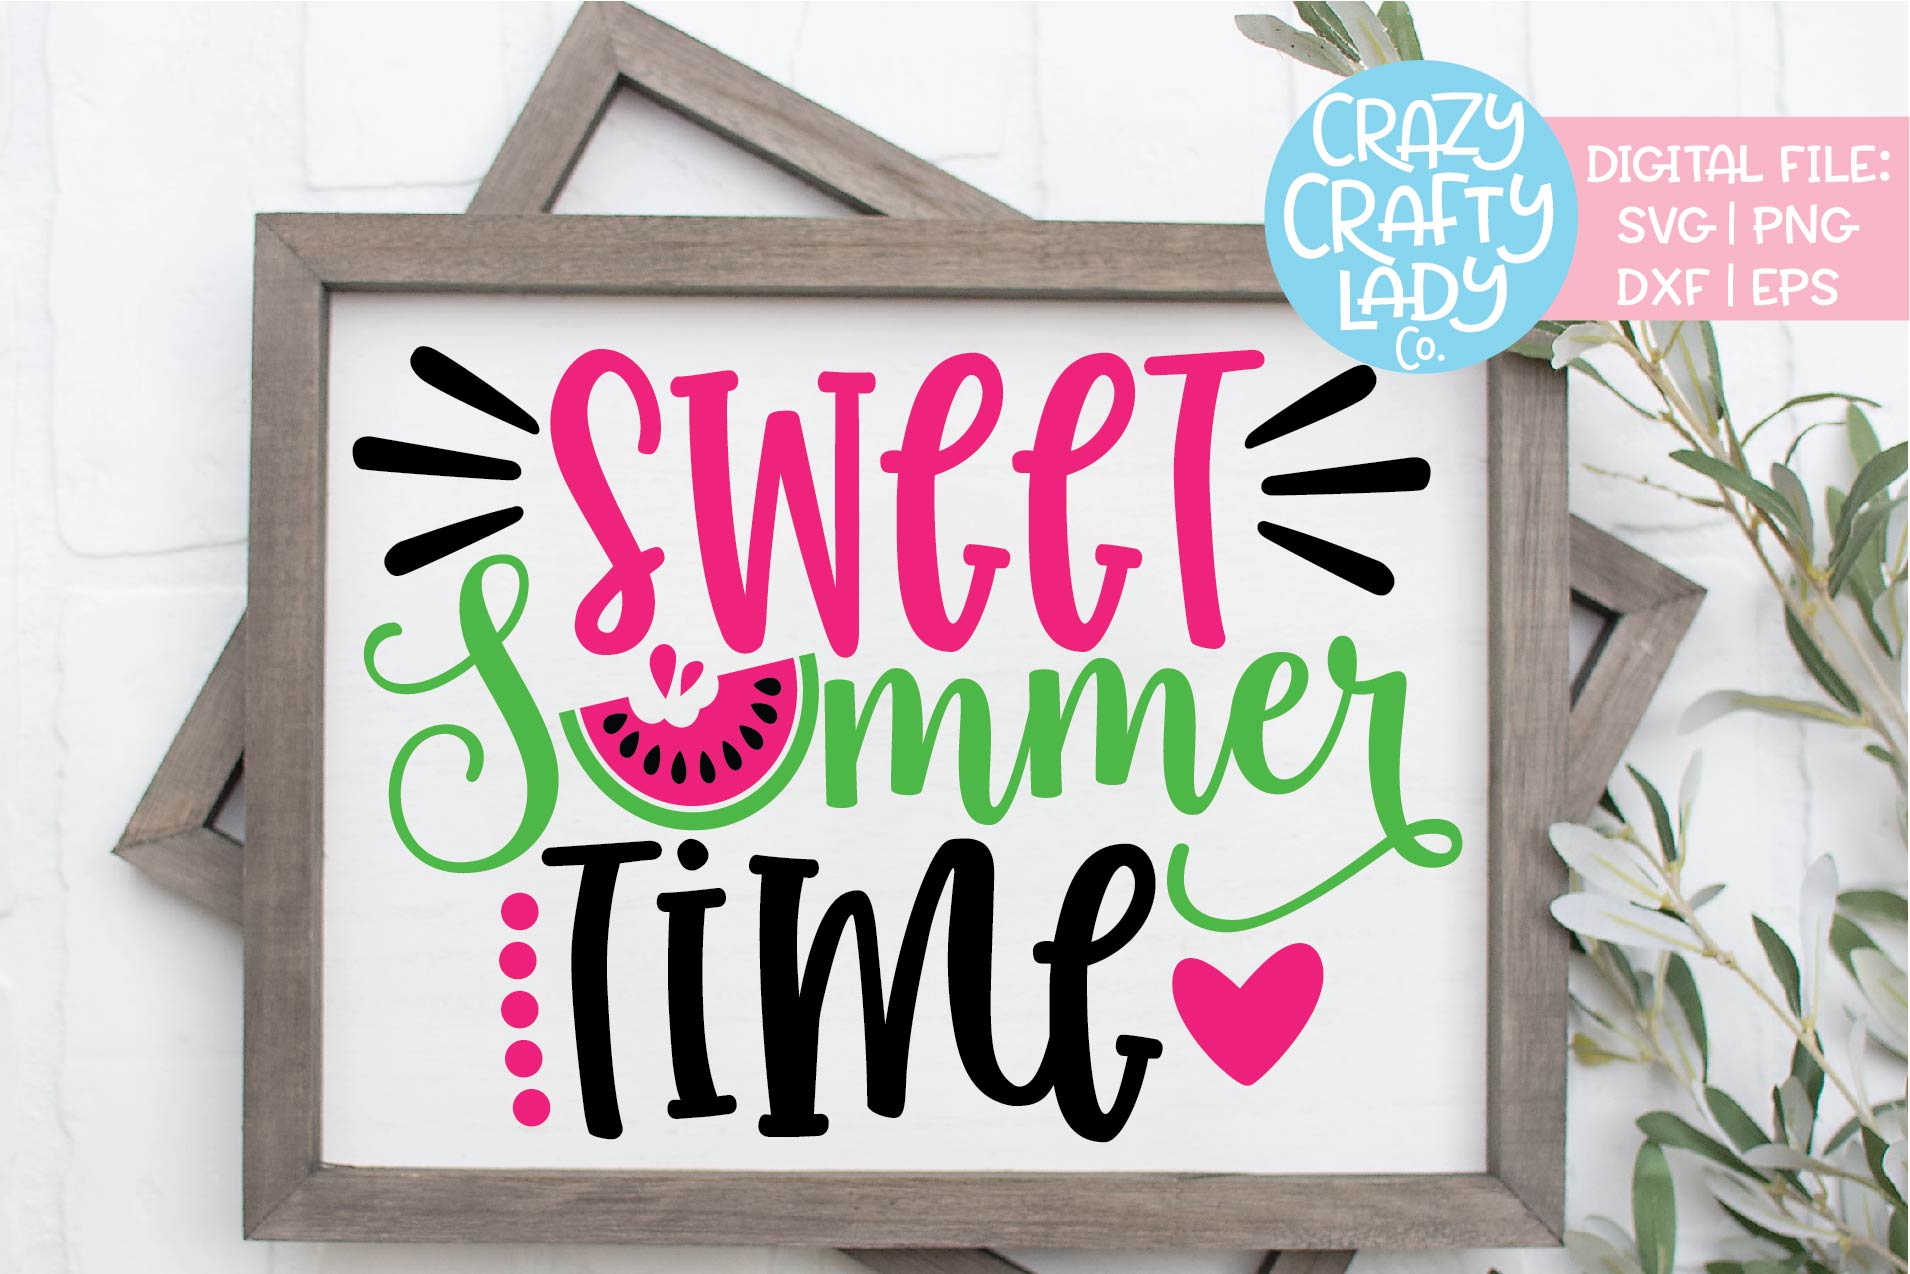 Sweet Summertime Watermelon SVG DXF EPS PNG Cut File ...